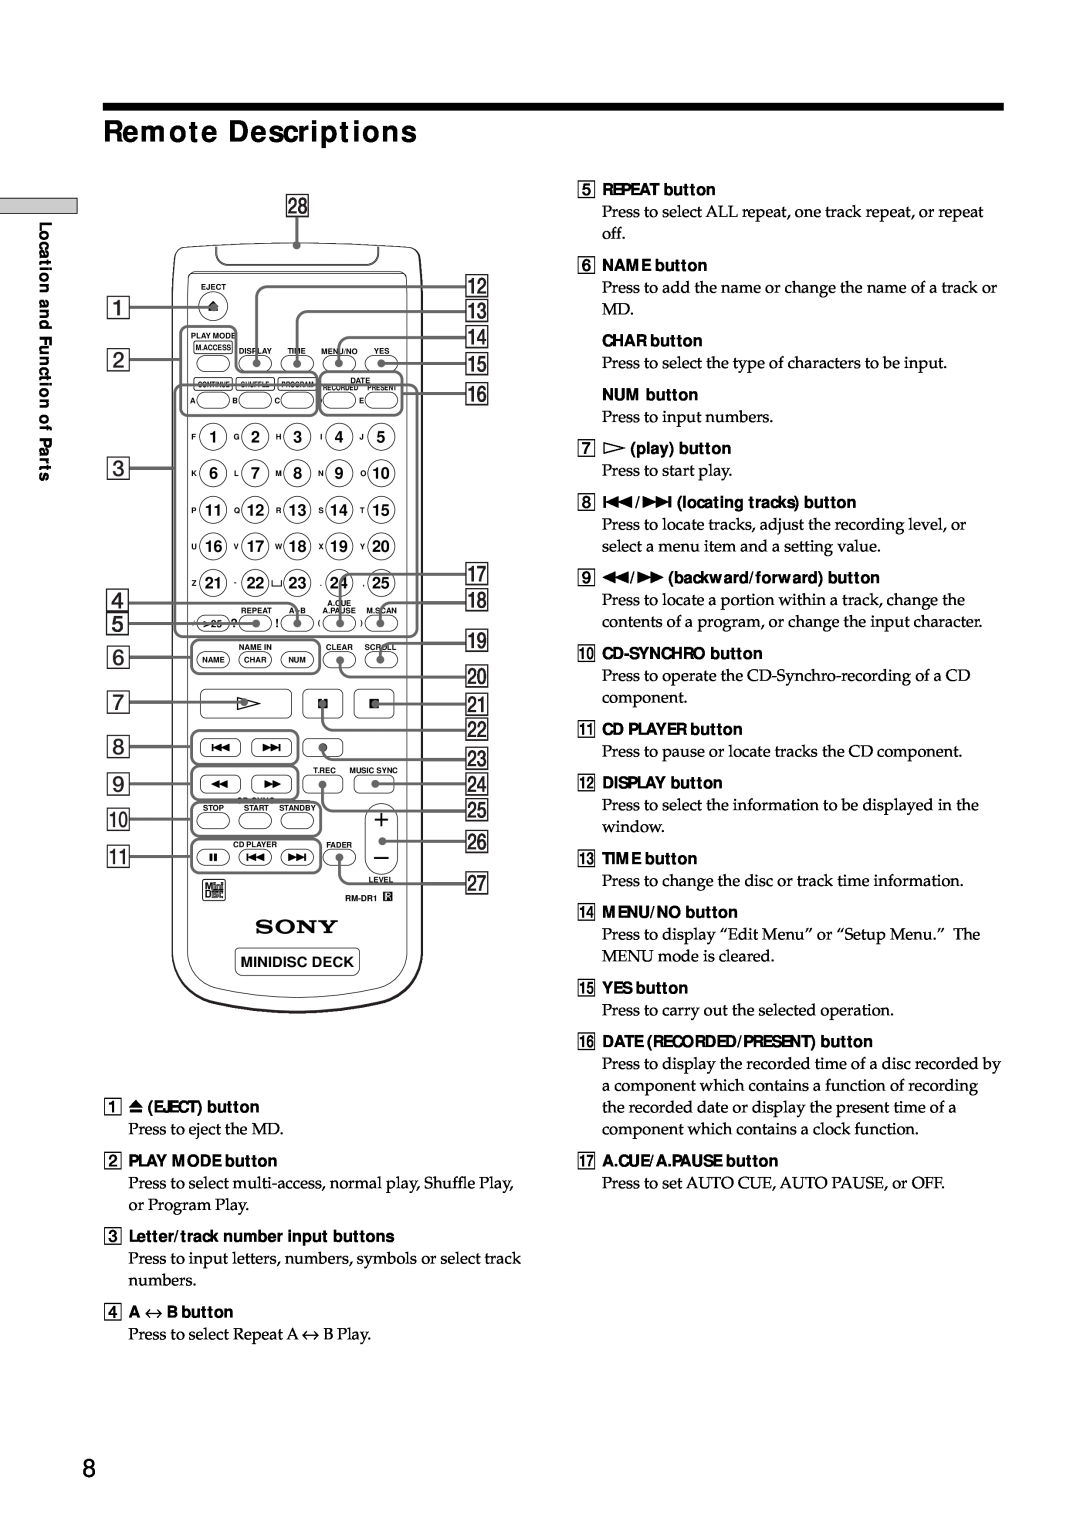 Sony MDS-E12 operating instructions Remote Descriptions 